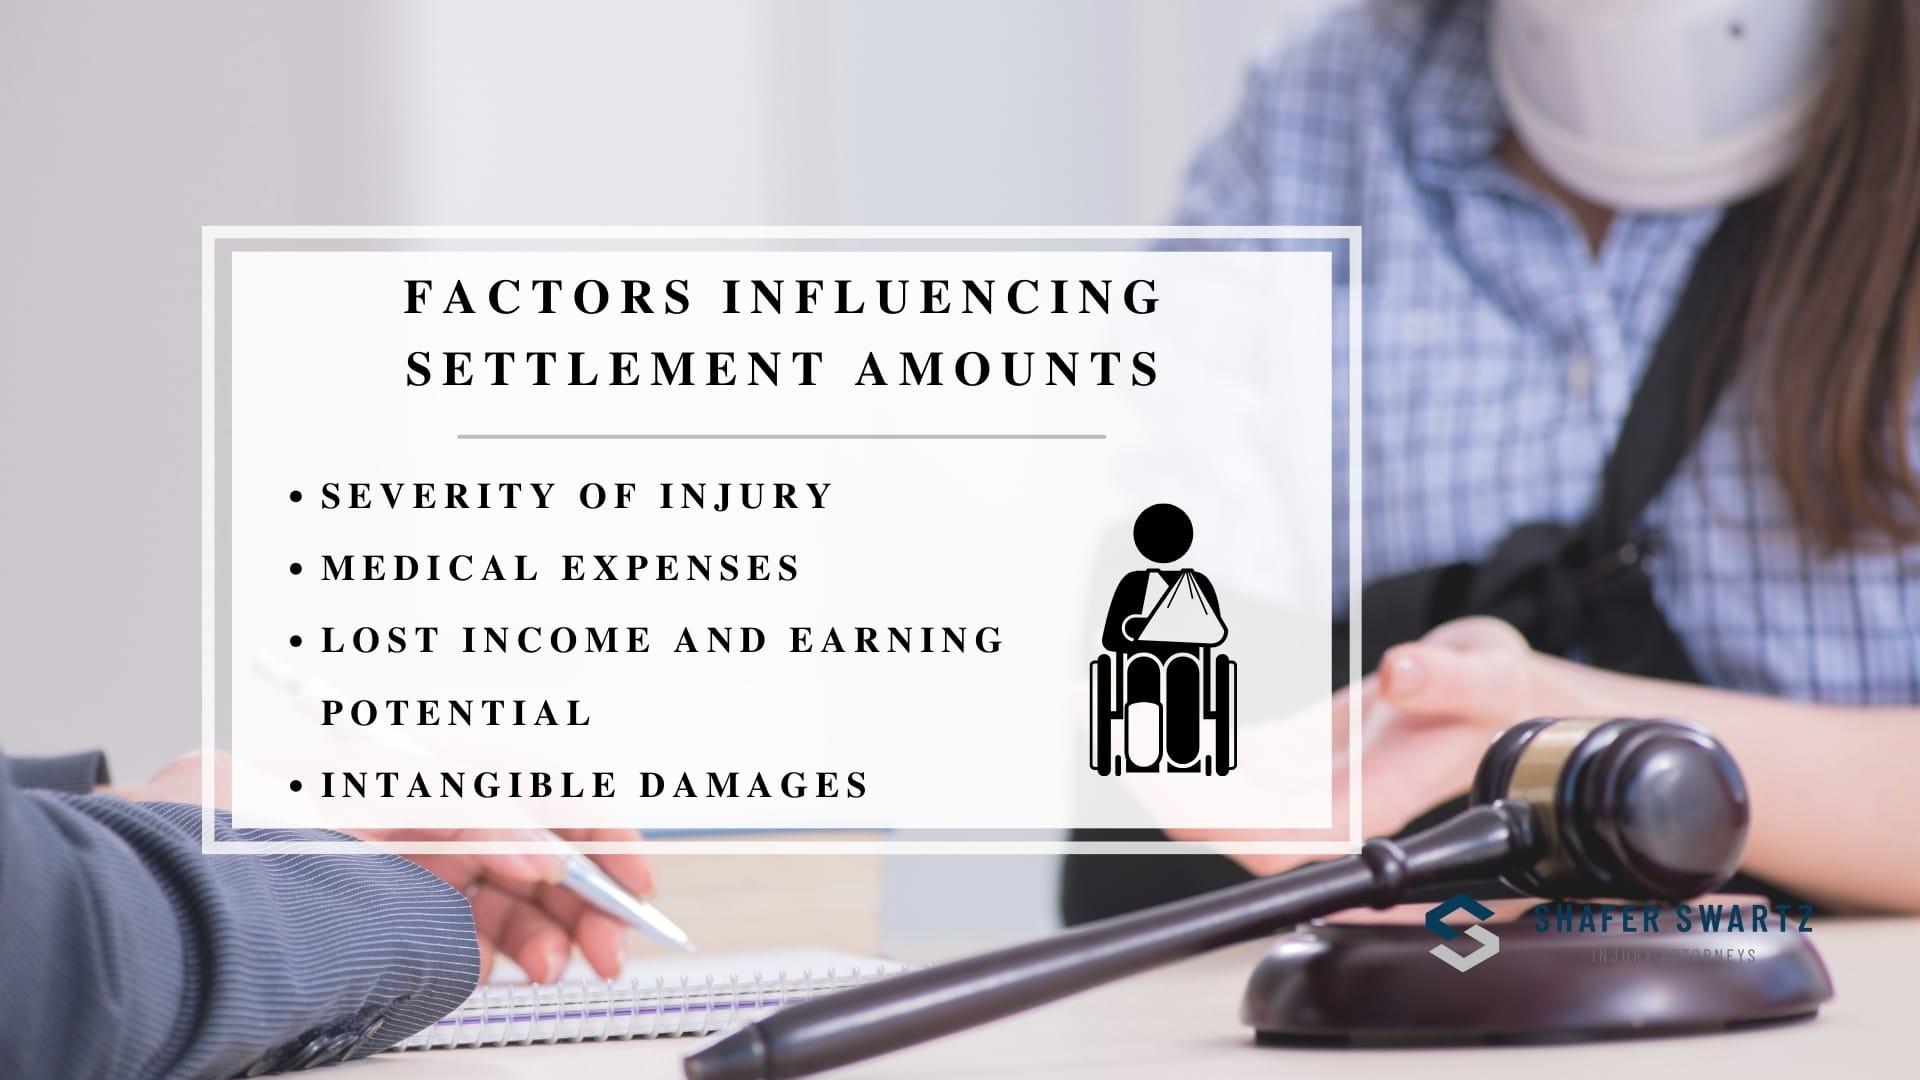 Infographic image of factors influencing settlement amounts